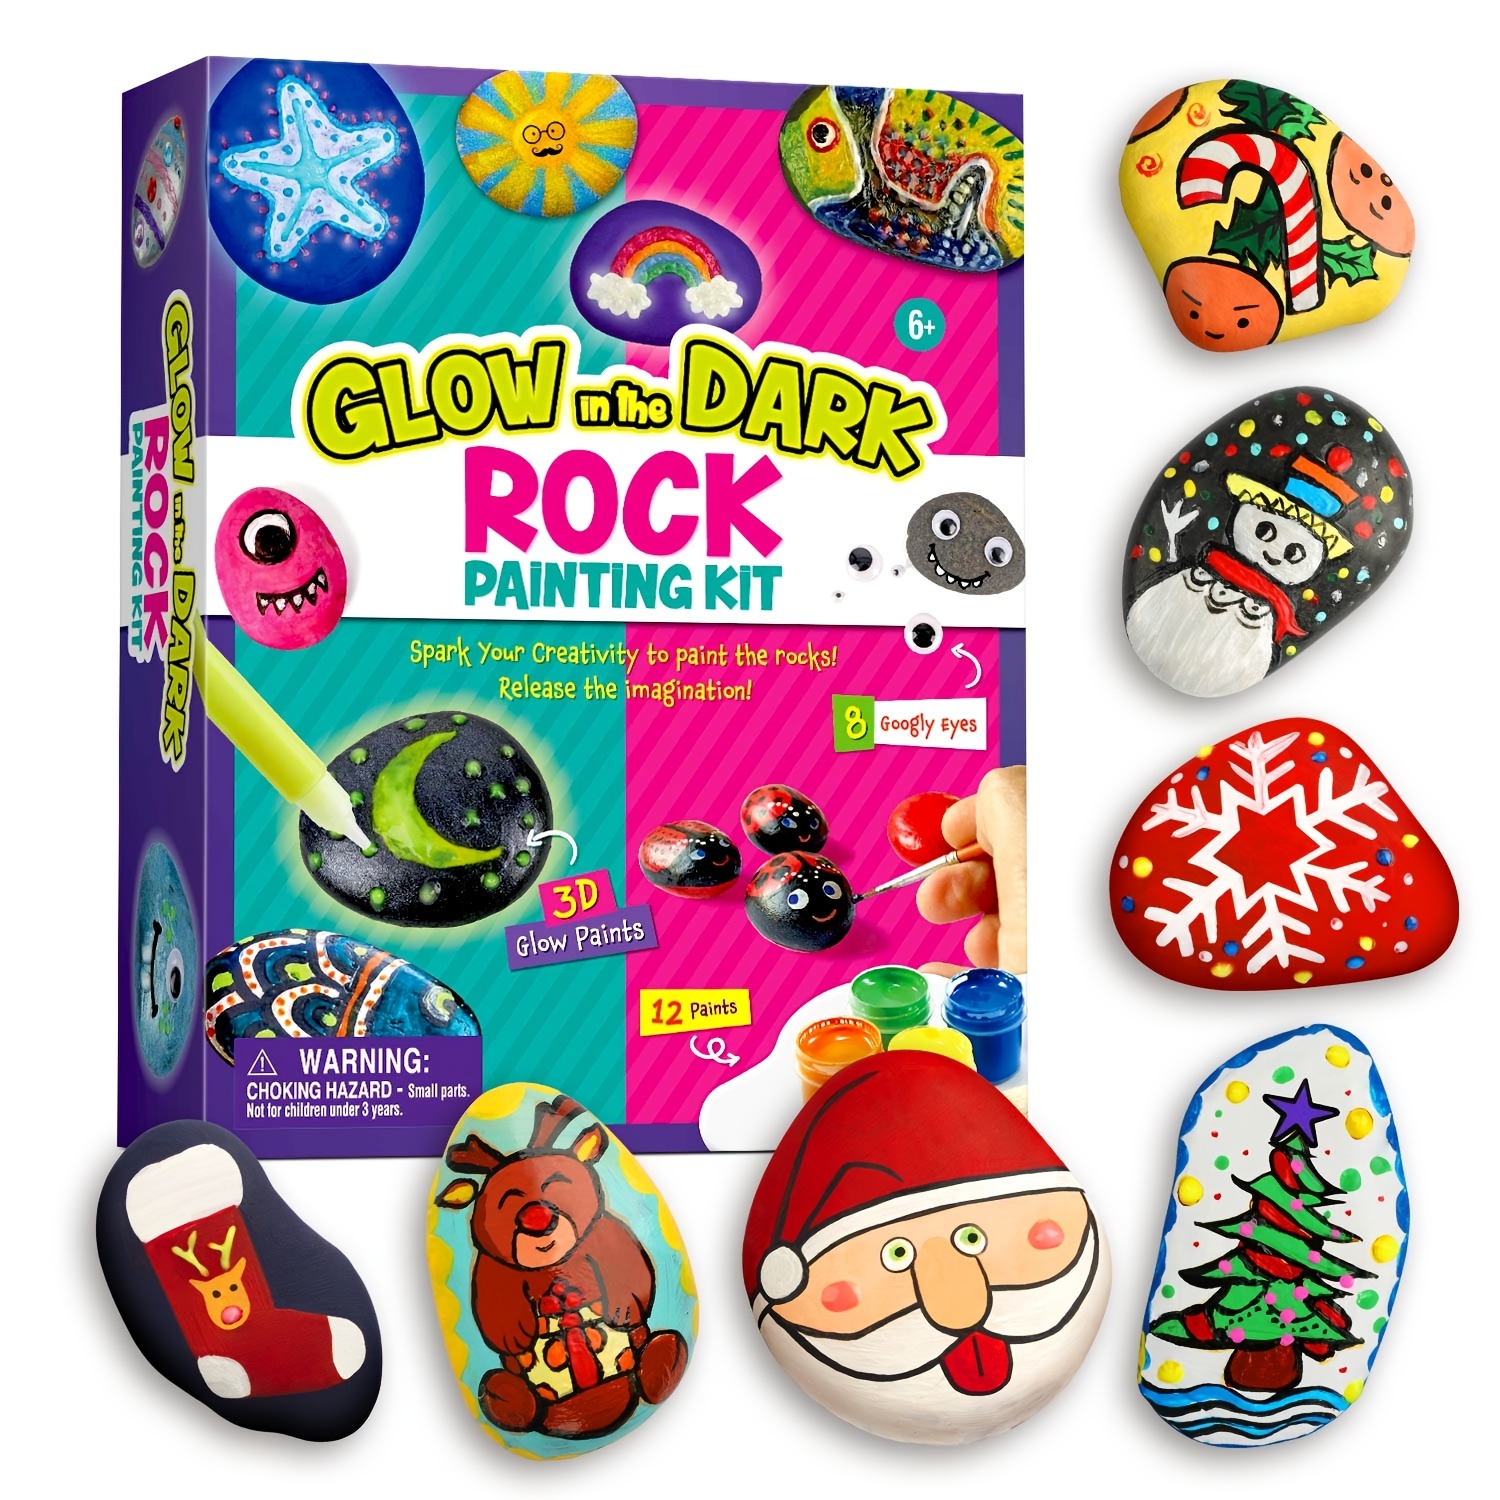 XXTOYS Rock Painting Kit for Kids,Crafts for Kids 6-8,Glow in The Dark Rock  Painting,Creativity Crafts Kids,Outdoor Arts and Crafts for Boys & Girls